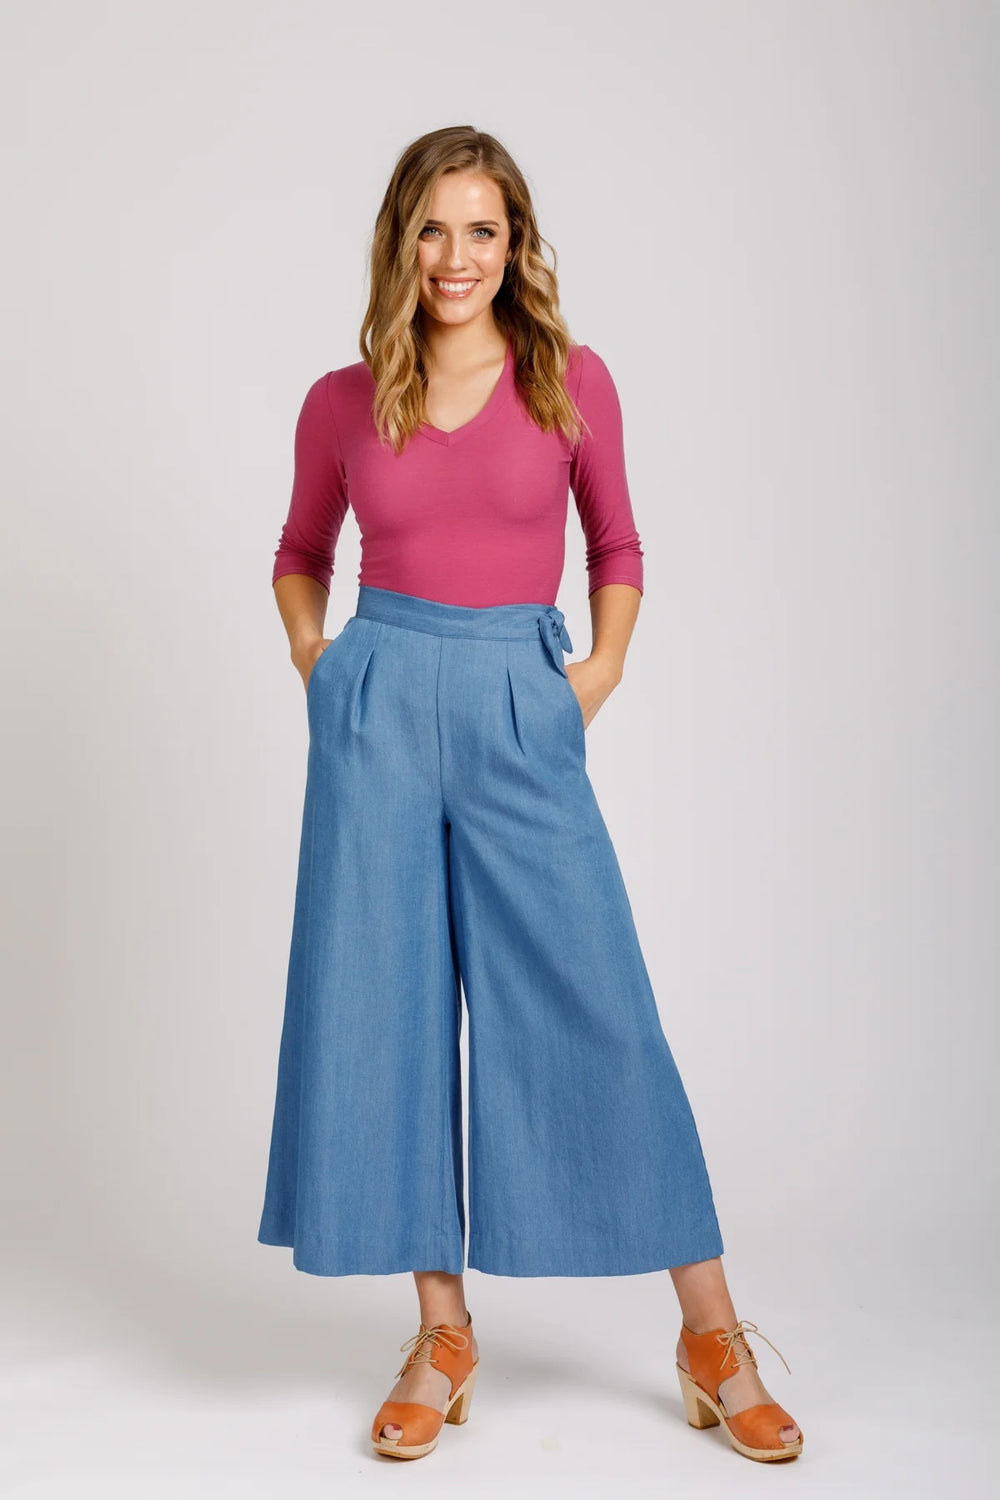 Woman wearing the Flint Pants and Shorts sewing pattern from Megan Nielsen on The Fold Line. A trouser pattern made in denim, twill, poplin, broadcloth, linens, suiting, gabardine, pique, wool blends, cottons, rayon, tencels, or silk fabrics, featuring a 